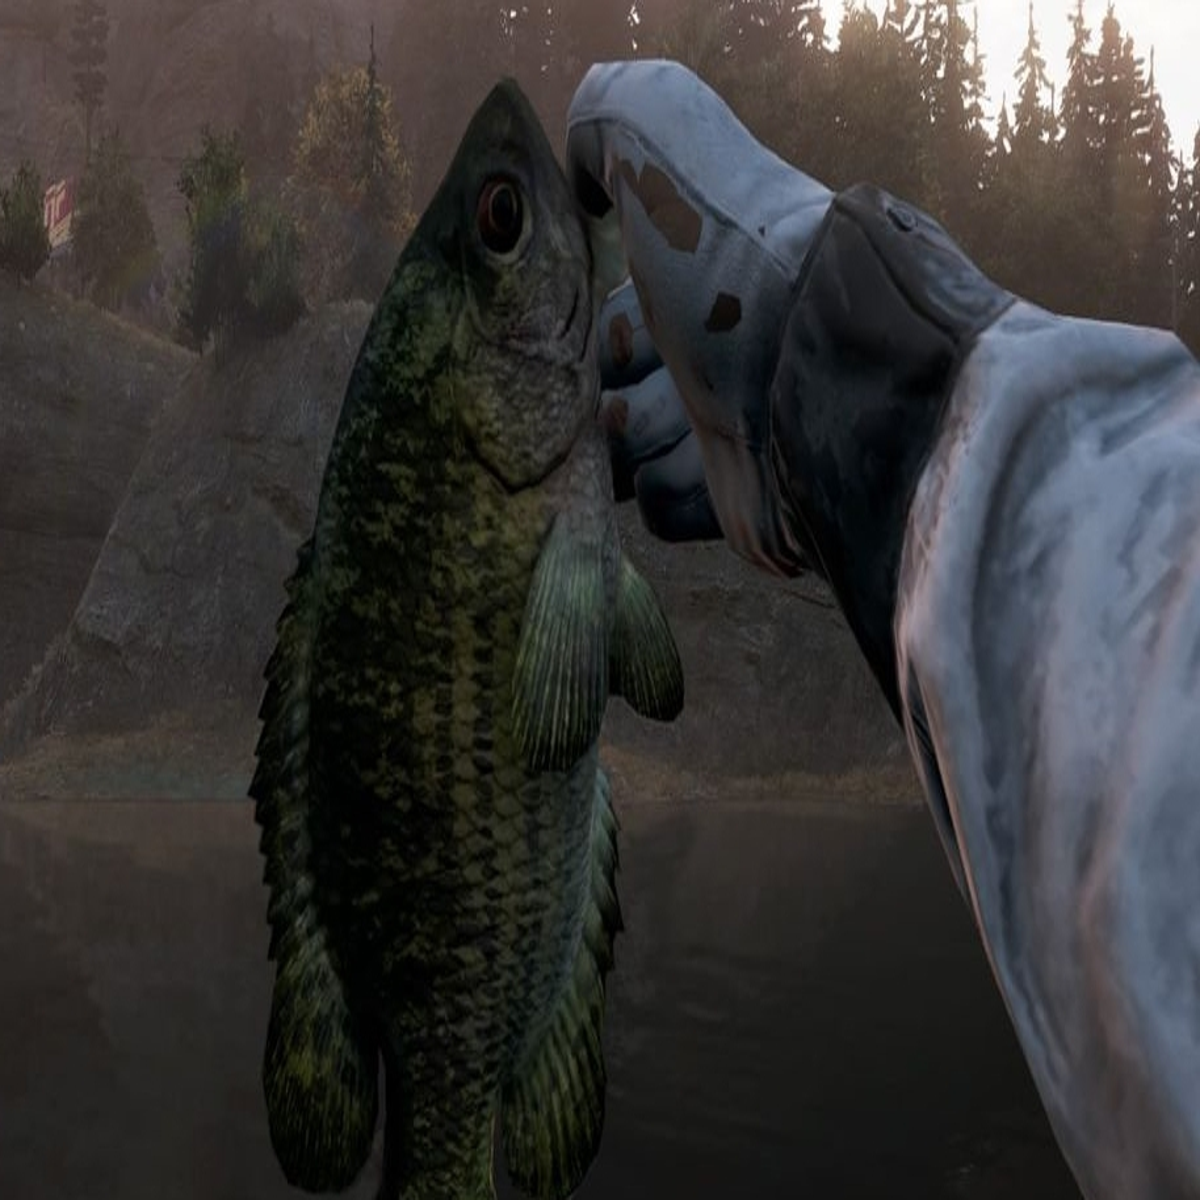 Steam Community :: Guide :: I want all the fish ! How to catch fish ?